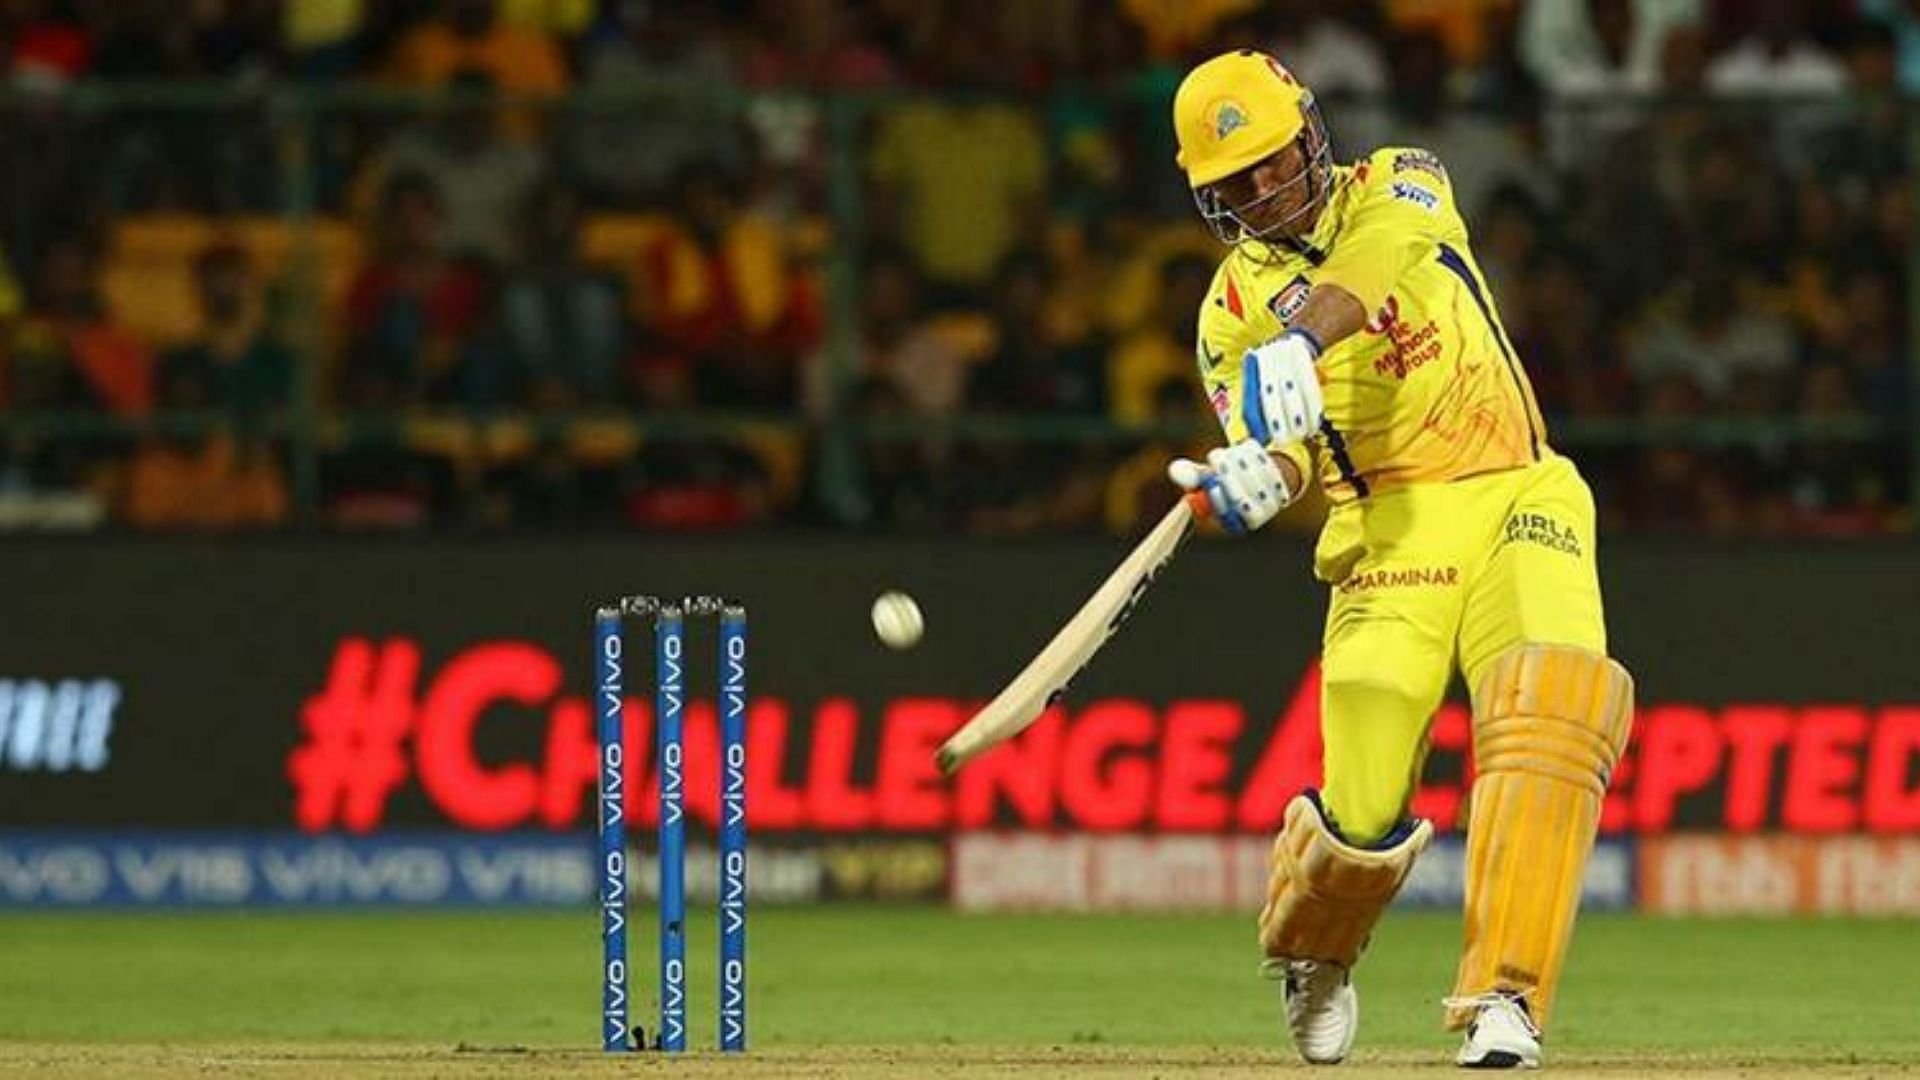 MS Dhoni has destroyed RCB bowling attacks a number of times before. (P.C.:iplt20.com)